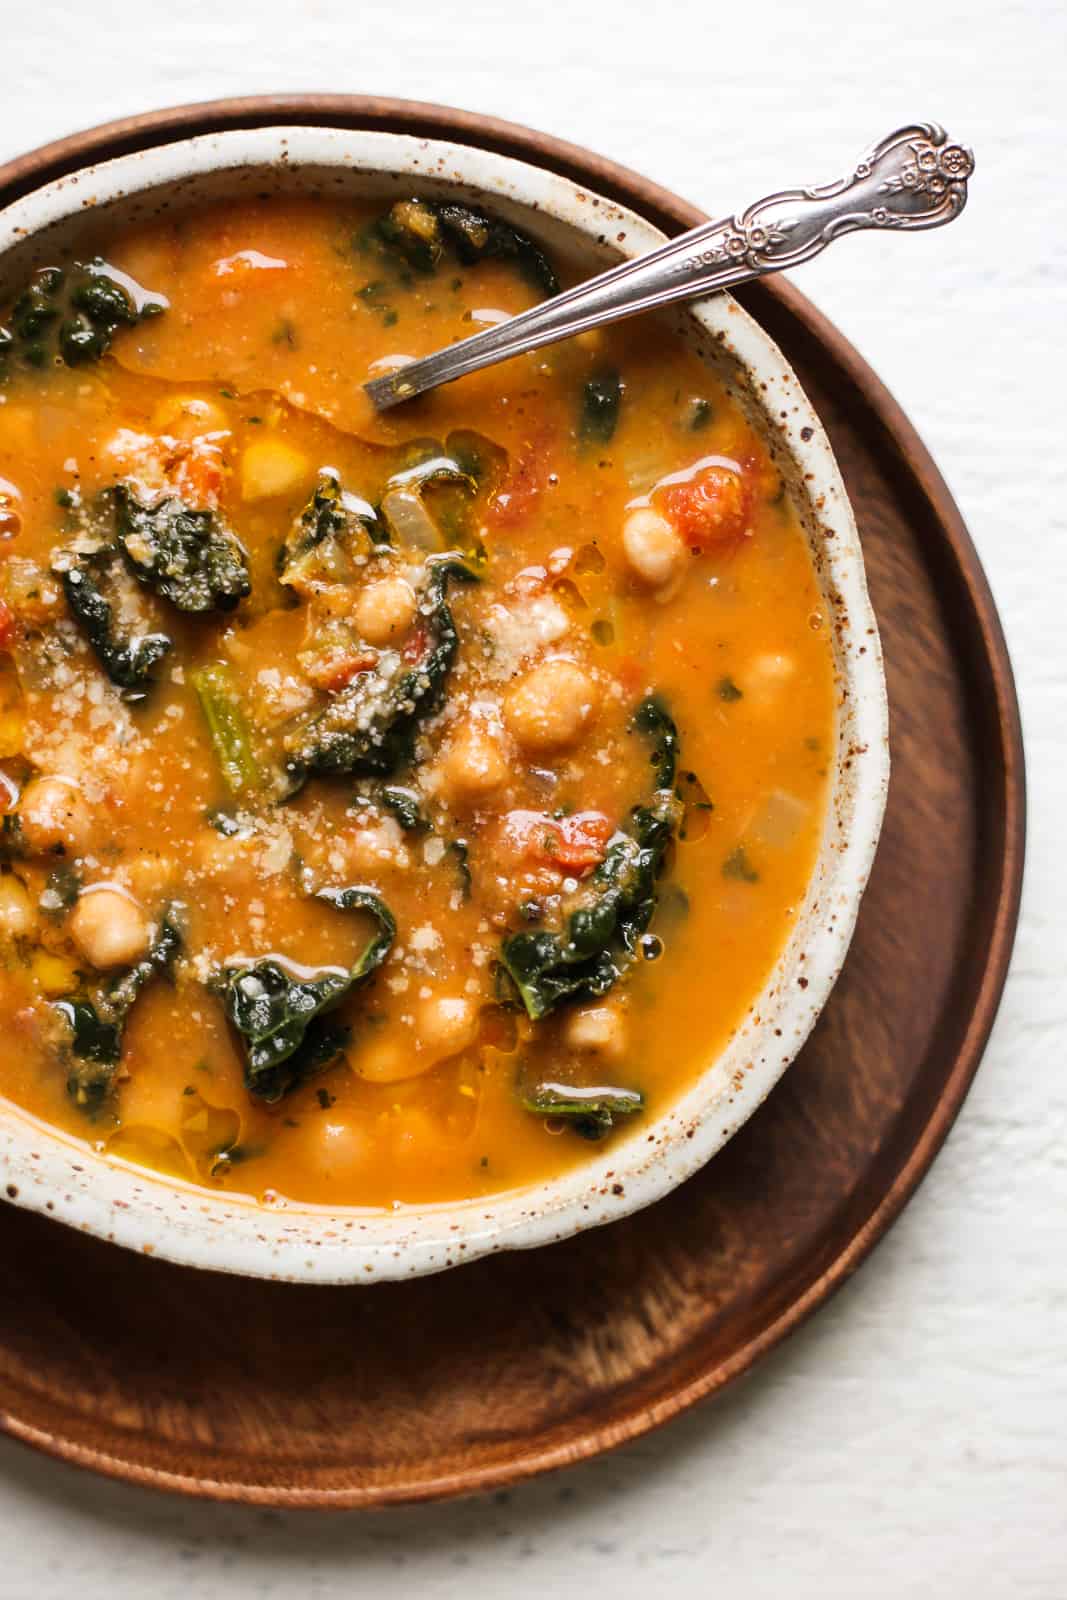 Easy Chickpea and Kale Tuscan-Style Soup – The Defined Dish